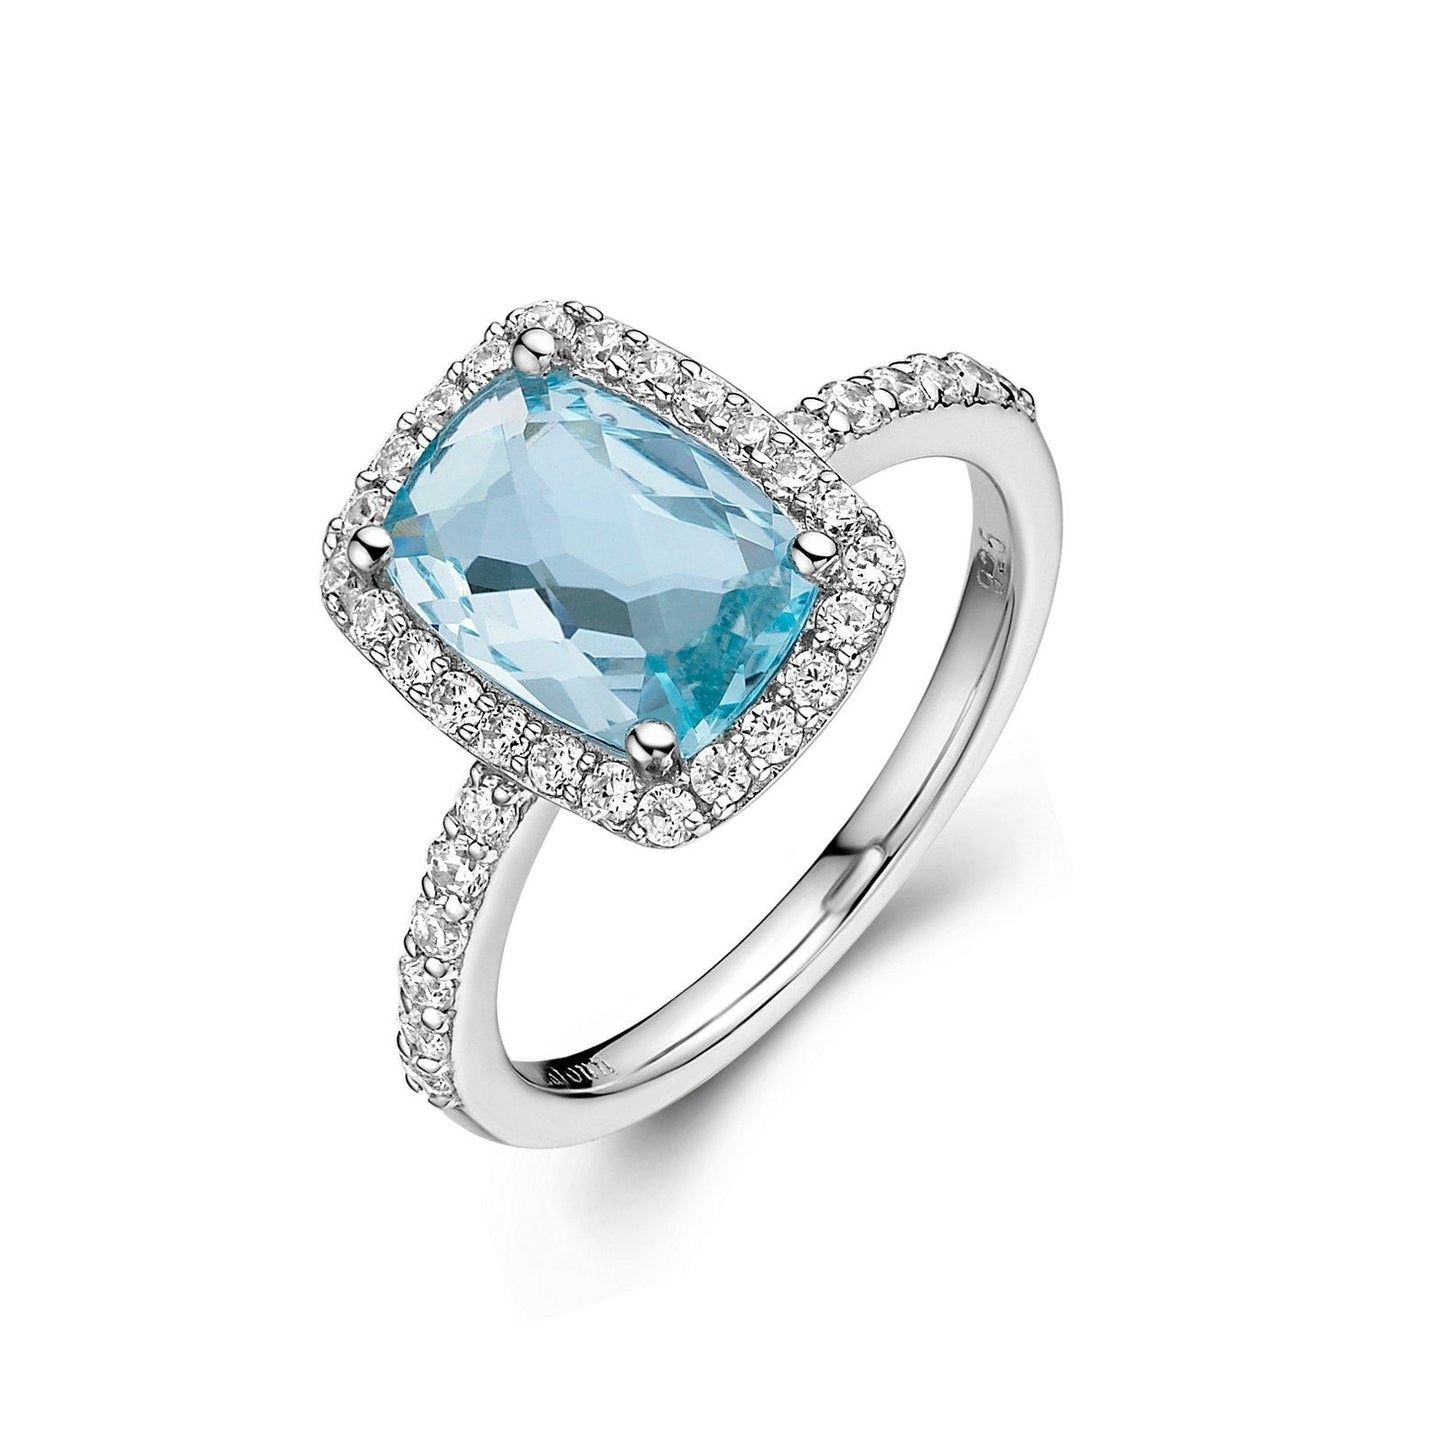 Lafonn Genuine Blue Topaz Halo Ring Blue Topaz RINGS Size 5 Platinum Appx CTW: 3.73 cts. Blue Topaz: Appx 3.21 cts.  Lassaire simulated diamonds: 0.52 cts. CTS 